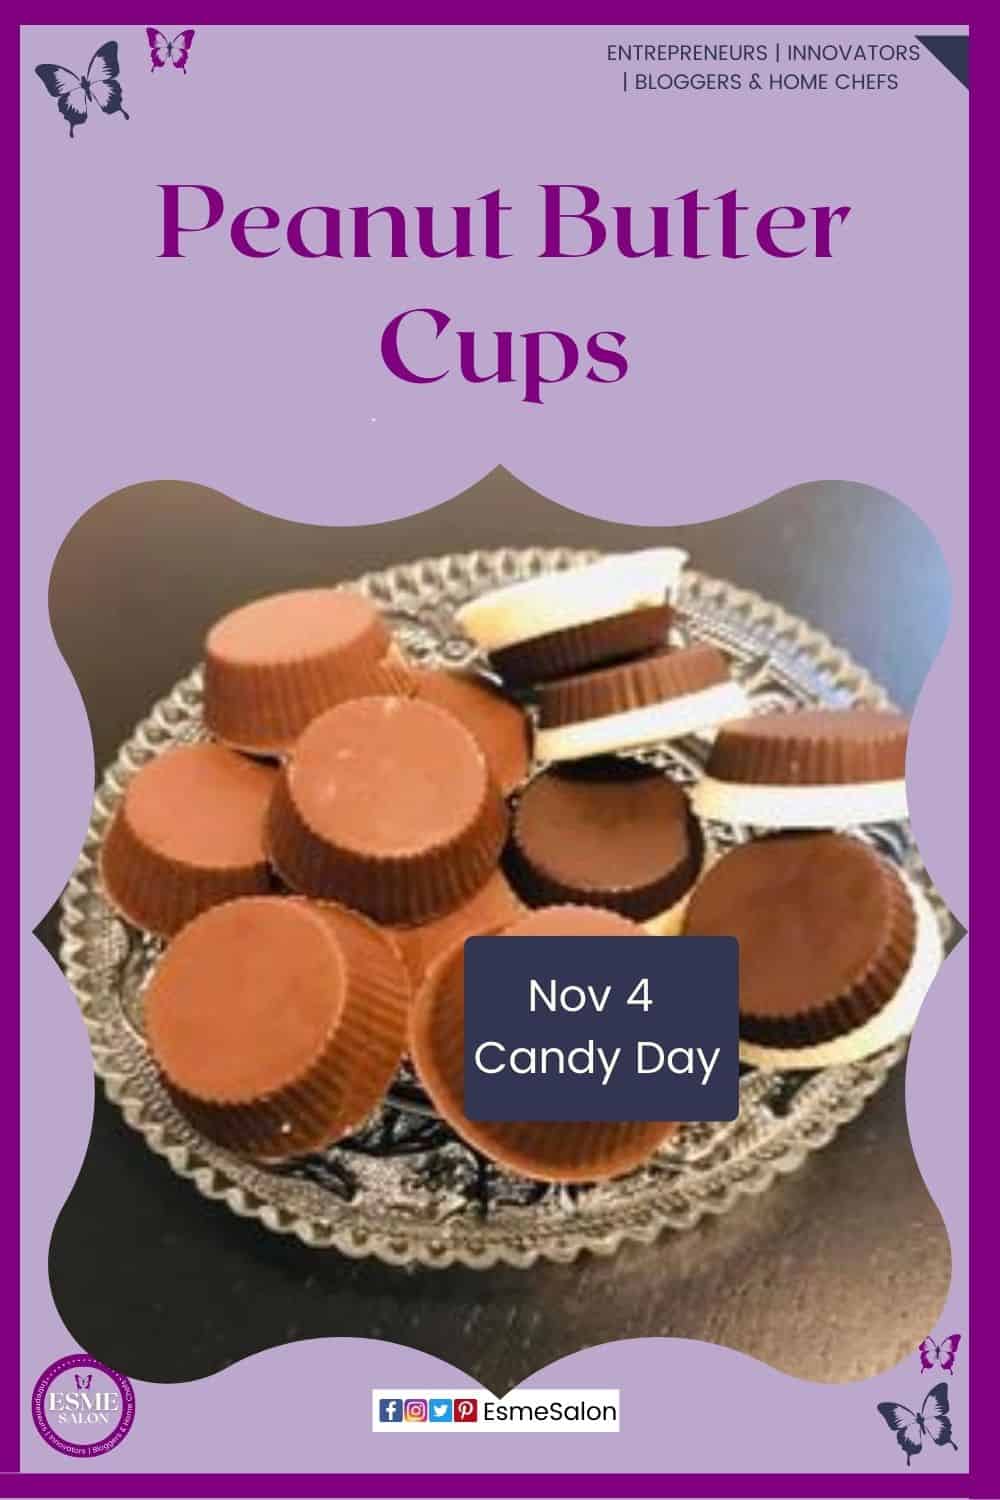 an image of a glass tray filled with Diabetic-Friendly Peanut Butter Cups